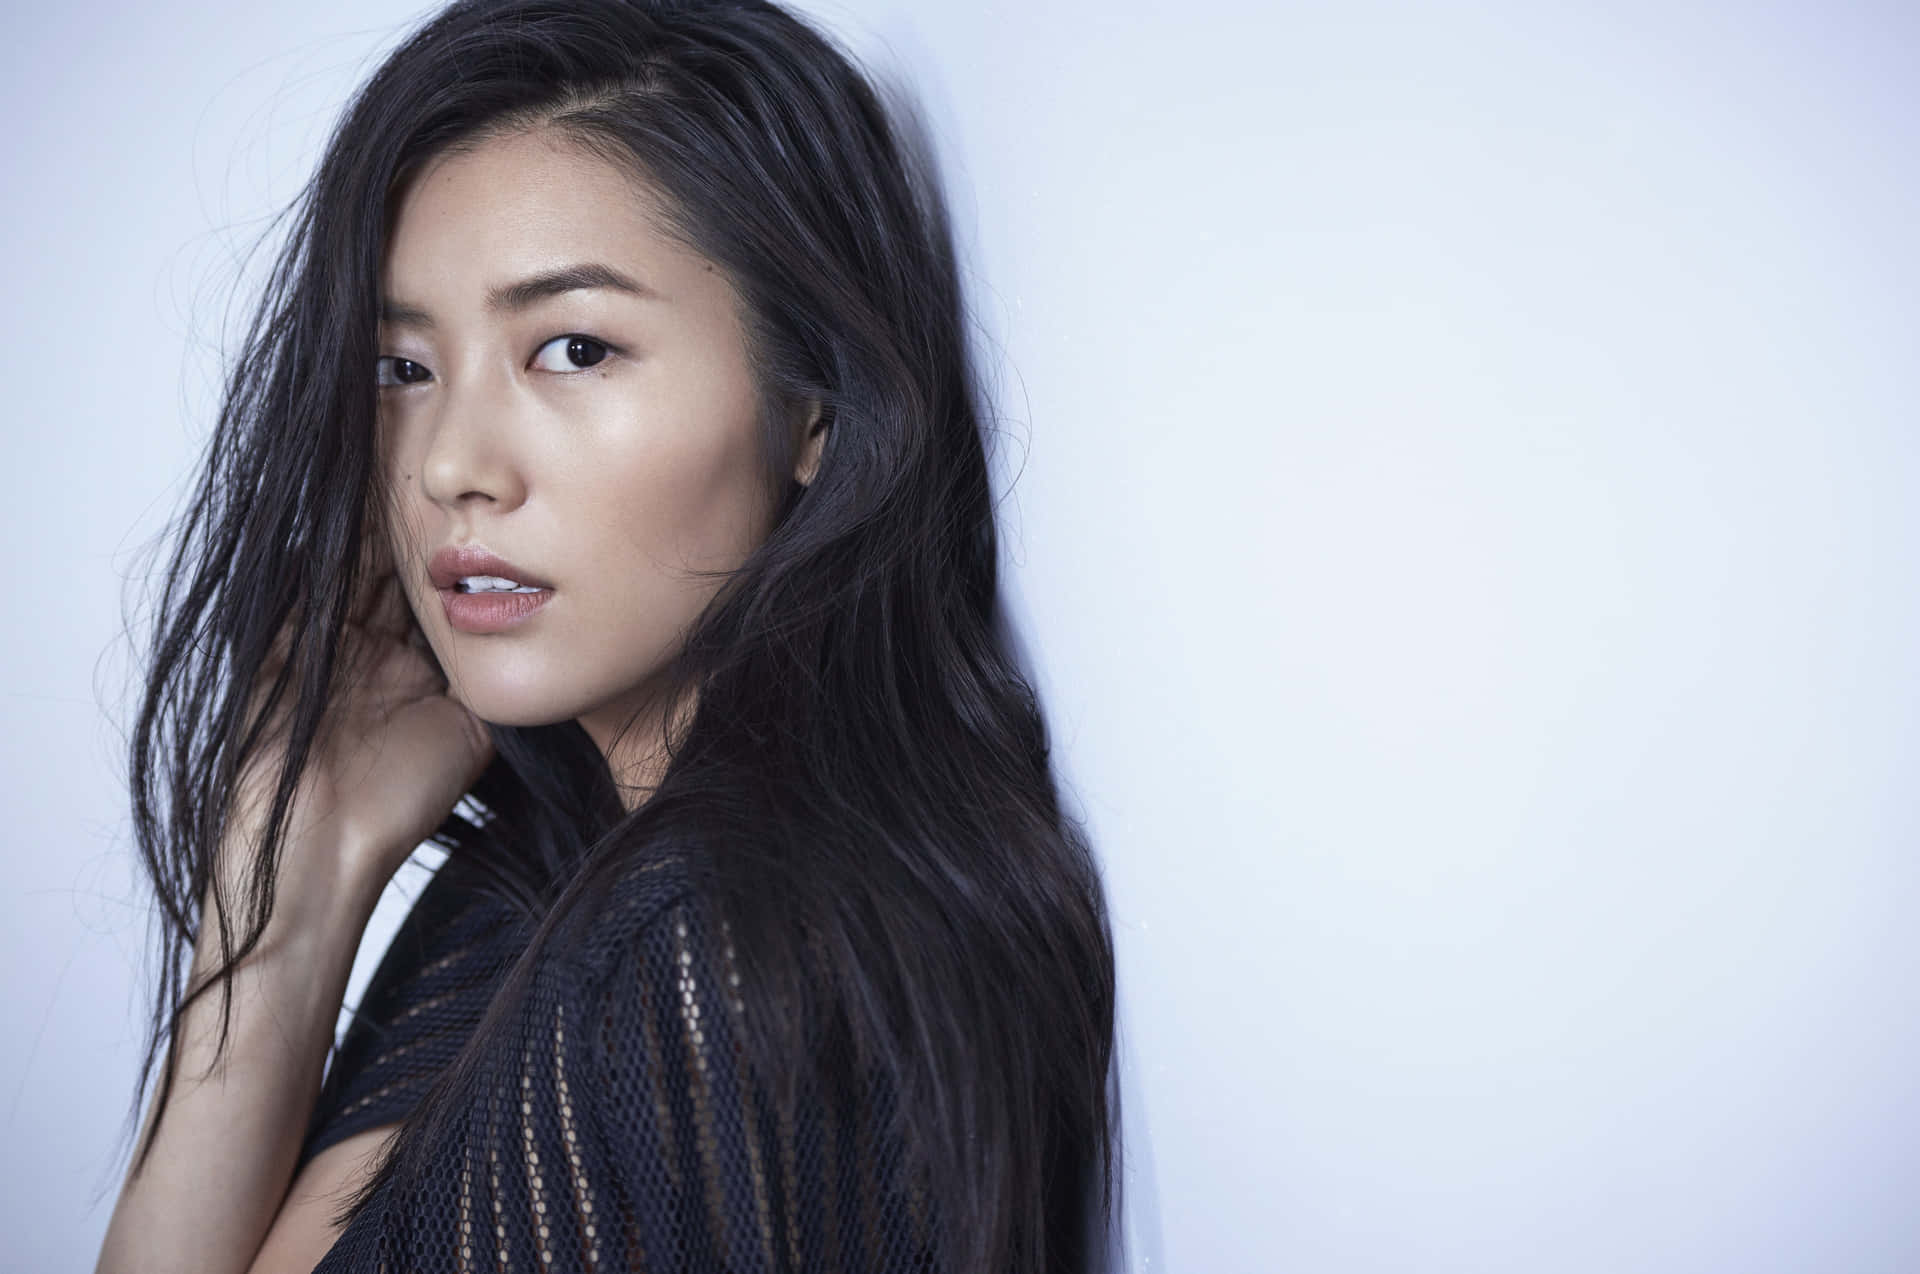 Chinese Supermodel Liu Wen Radiating Confidence In A Chic And Stylish Dress